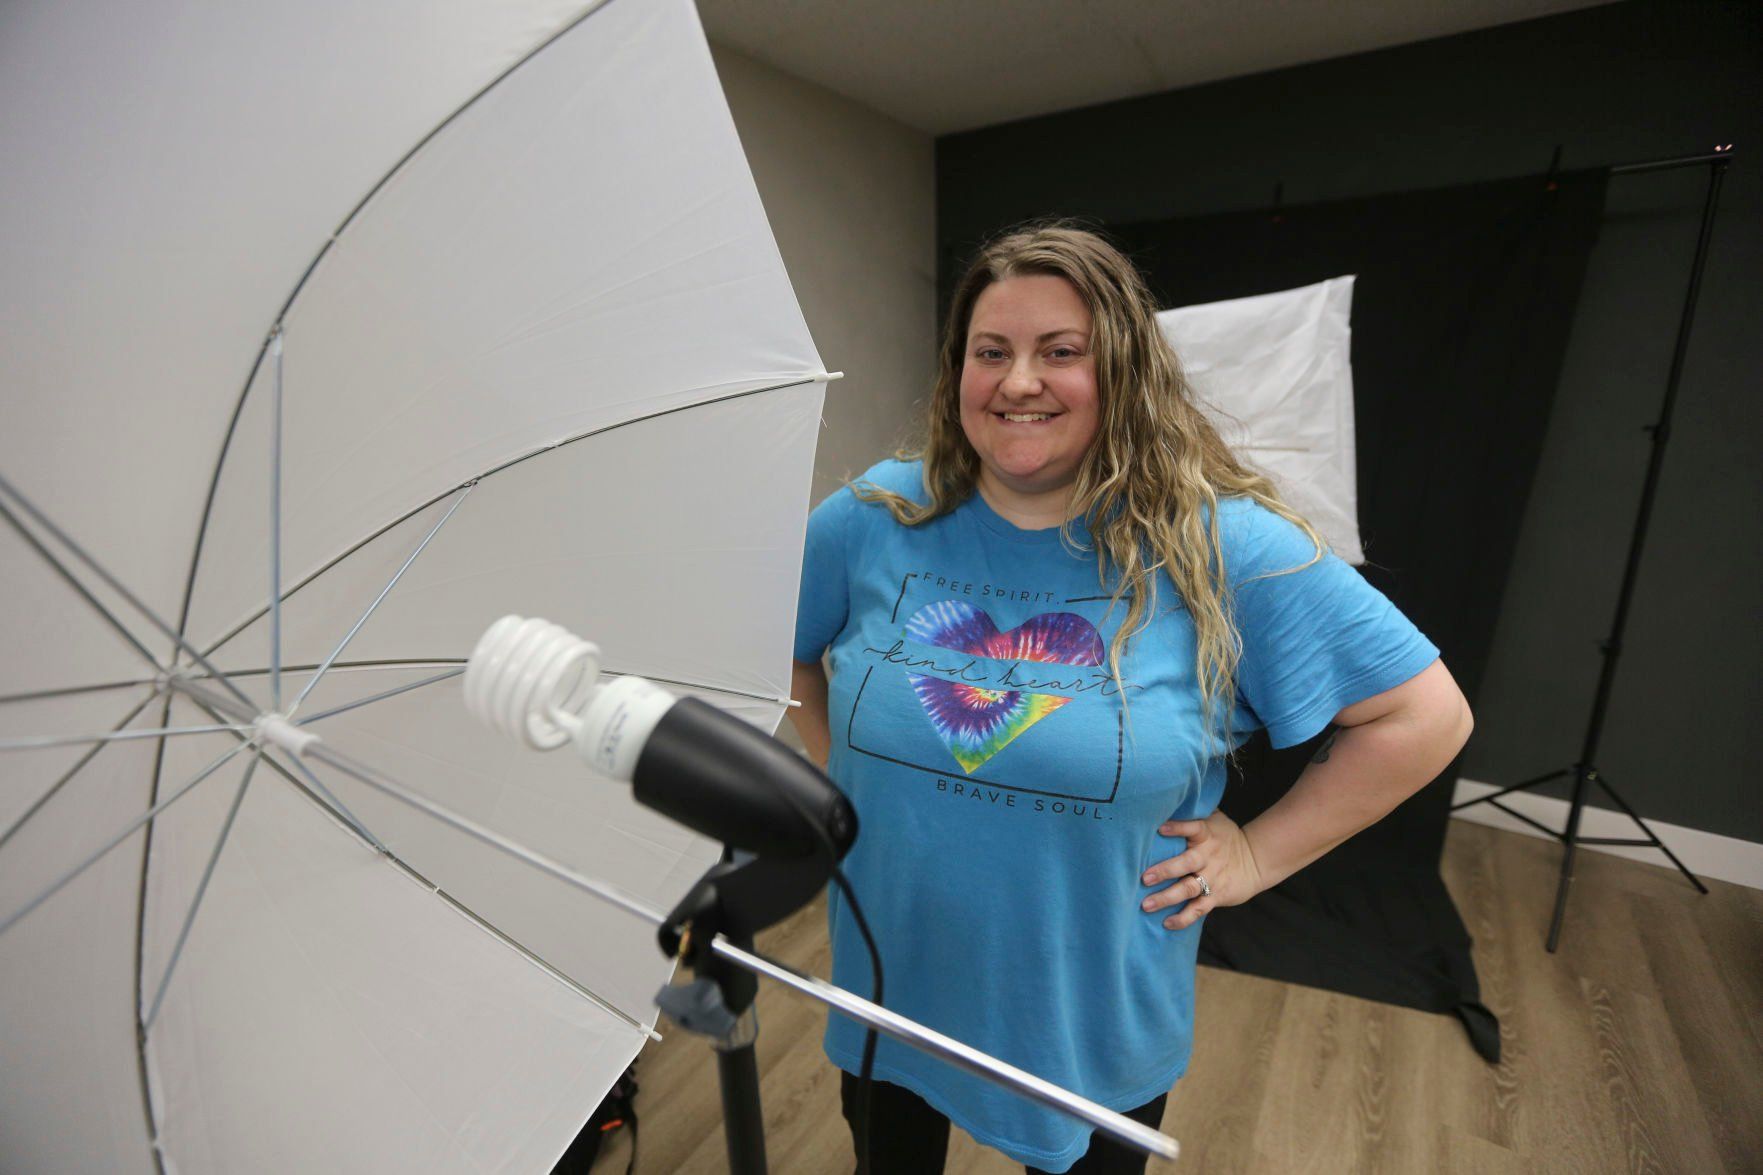 Ashley Regan, who has been a Dubuque-based photographer since 2015, opened her first studio on Sunday. The studio, Rae of Light Photography, is located at 890 Main St., Suite 3C in Dubuque.    PHOTO CREDIT: Dave Kettering